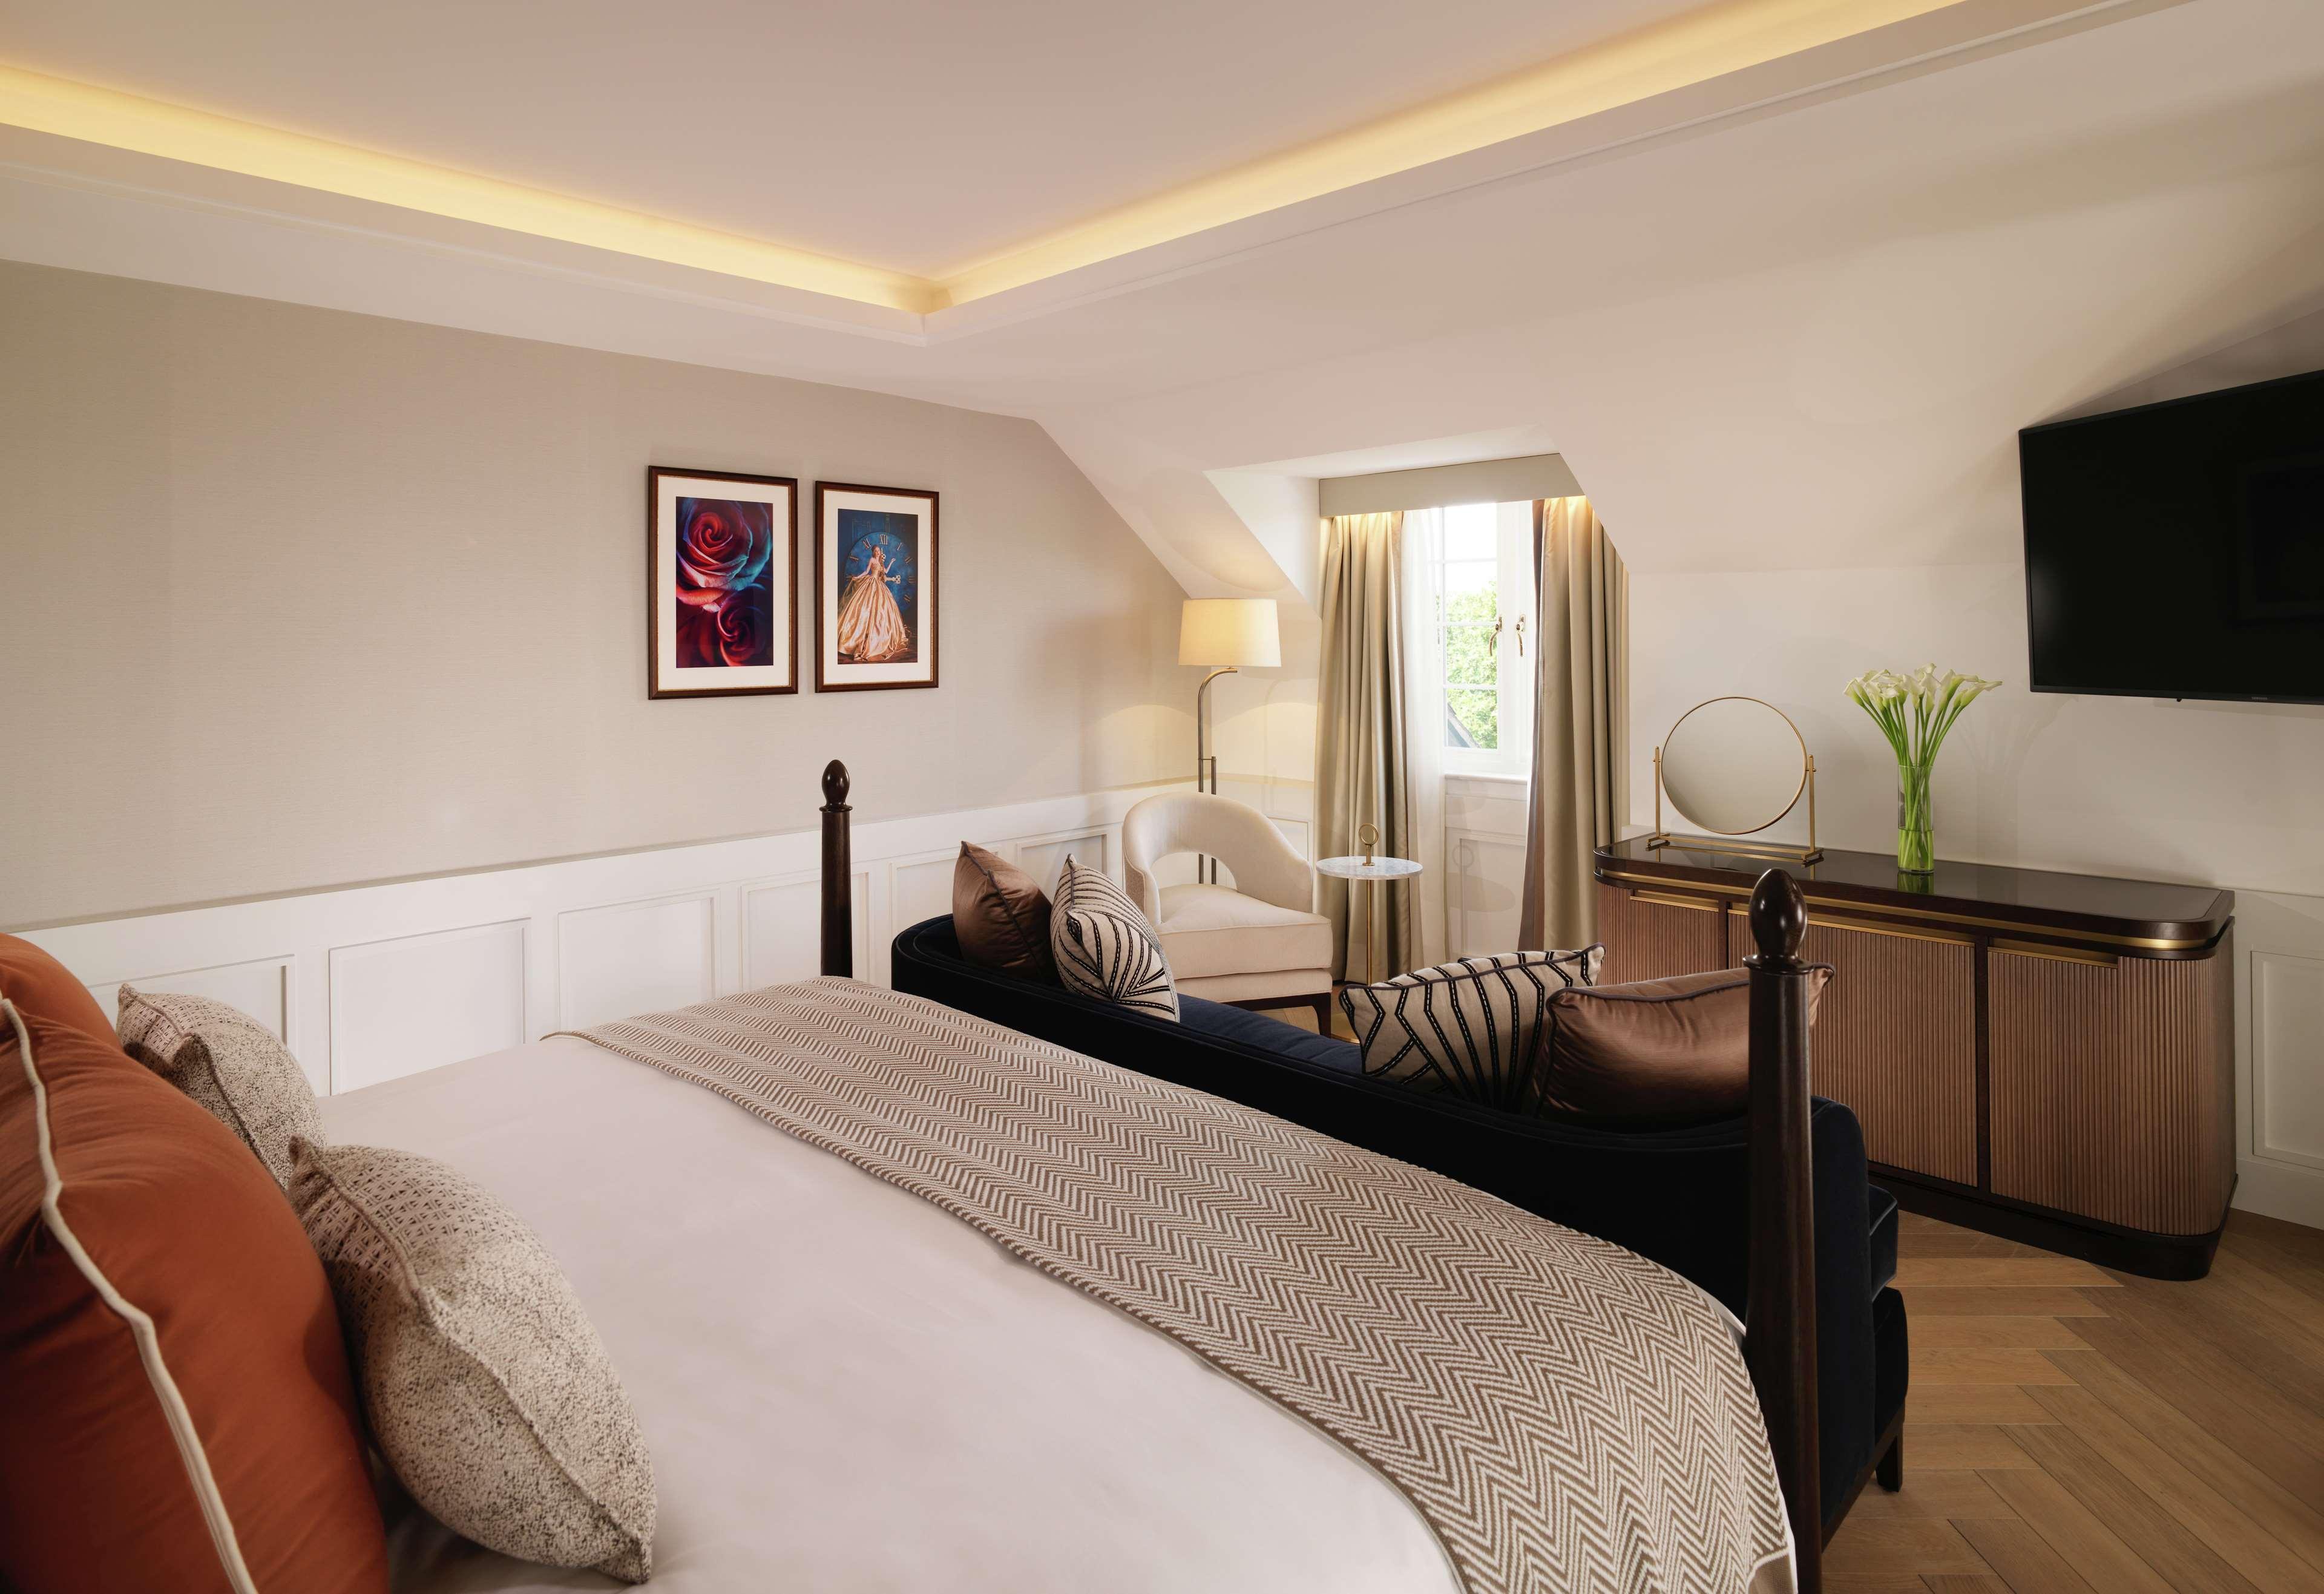 The Biltmore Mayfair, LXR Hotels & Resorts from $131. London Hotel